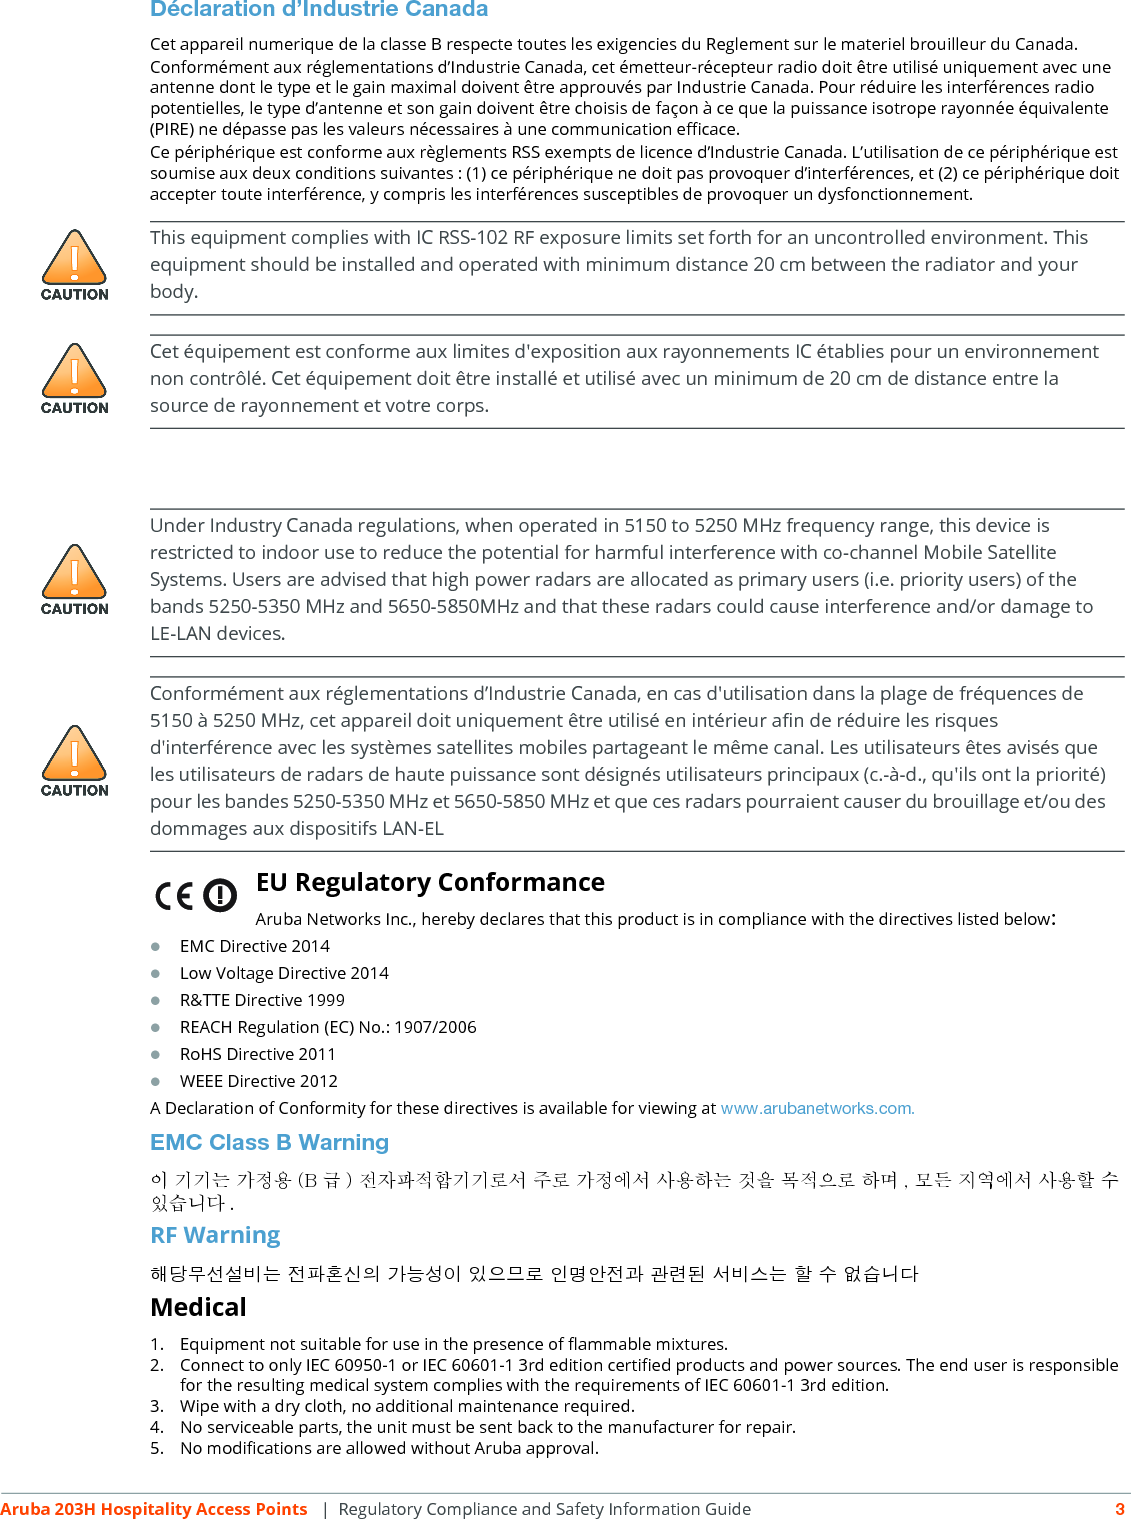 Aruba 203H Hospitality Access Points  | Regulatory Compliance and Safety Information Guide 3Déclaration d’Industrie CanadaCet appareil numerique de la classe B respecte toutes les exigencies du Reglement sur le materiel brouilleur du Canada.Conformément aux réglementations d’Industrie Canada, cet émetteur-récepteur radio doit être utilisé uniquement avec une antenne dont le type et le gain maximal doivent être approuvés par Industrie Canada. Pour réduire les interférences radio potentielles, le type d’antenne et son gain doivent être choisis de façon à ce que la puissance isotrope rayonnée équivalente (PIRE) ne dépasse pas les valeurs nécessaires à une communication efficace. Ce périphérique est conforme aux règlements RSS exempts de licence d’Industrie Canada. L’utilisation de ce périphérique est soumise aux deux conditions suivantes : (1) ce périphérique ne doit pas provoquer d’interférences, et (2) ce périphérique doit accepter toute interférence, y compris les interférences susceptibles de provoquer un dysfonctionnement.EU Regulatory Conformance Aruba Networks Inc., hereby declares that this product is in compliance with the directives listed below:EMC Directive 2014Low Voltage Directive 2014R&amp;TTE Directive 1999REACH Regulation (EC) No.: 1907/2006RoHS Directive 2011WEEE Directive 2012A Declaration of Conformity for these directives is available for viewing at www.arubanetworks.com.EMC Class B Warning이 기기는 가정용 (B 급 ) 전자파적합기기로서 주로 가정에서 사용하는 것을 목적으로 하며 , 모든 지역에서 사용할 수 있습니다 .RF Warning해당무선설비는 전파혼신의 가능성이 있으므로 인명안전과 관련된 서비스는 할 수 없습니다Medical1. Equipment not suitable for use in the presence of flammable mixtures.2. Connect to only IEC 60950-1 or IEC 60601-1 3rd edition certified products and power sources. The end user is responsible for the resulting medical system complies with the requirements of IEC 60601-1 3rd edition.3. Wipe with a dry cloth, no additional maintenance required.4. No serviceable parts, the unit must be sent back to the manufacturer for repair.5. No modifications are allowed without Aruba approval.This equipment complies with IC RSS-102 RF exposure limits set forth for an uncontrolled environment. This equipment should be installed and operated with minimum distance 20 cm between the radiator and your body.Cet équipement est conforme aux limites d&apos;exposition aux rayonnements IC établies pour un environnement non contrôlé. Cet équipement doit être installé et utilisé avec un minimum de 20 cm de distance entre la source de rayonnement et votre corps.Under Industry Canada regulations, when operated in 5150 to 5250 MHz frequency range, this device is restricted to indoor use to reduce the potential for harmful interference with co-channel Mobile Satellite Systems. Users are advised that high power radars are allocated as primary users (i.e. priority users) of the bands 5250-5350 MHz and 5650-5850MHz and that these radars could cause interference and/or damage to LE-LAN devices.Conformément aux réglementations d’Industrie Canada, en cas d&apos;utilisation dans la plage de fréquences de 5150 à 5250 MHz, cet appareil doit uniquement être utilisé en intérieur afin de réduire les risques d&apos;interférence avec les systèmes satellites mobiles partageant le même canal. Les utilisateurs êtes avisés que les utilisateurs de radars de haute puissance sont désignés utilisateurs principaux (c.-à-d., qu&apos;ils ont la priorité) pour les bandes 5250-5350 MHz et 5650-5850 MHz et que ces radars pourraient causer du brouillage et/ou des dommages aux dispositifs LAN-EL